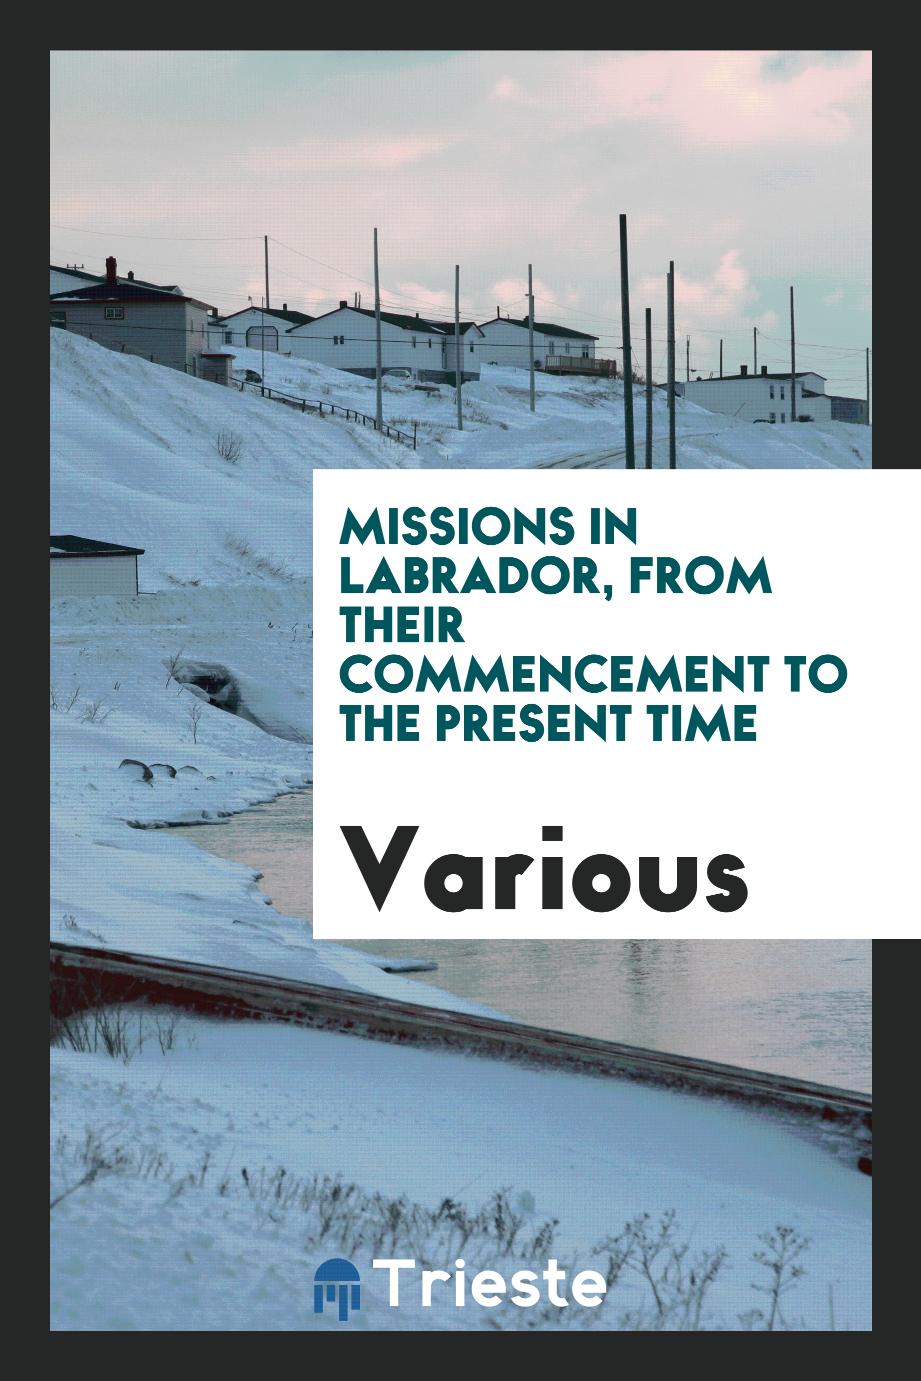 Missions in Labrador, from their commencement to the present time